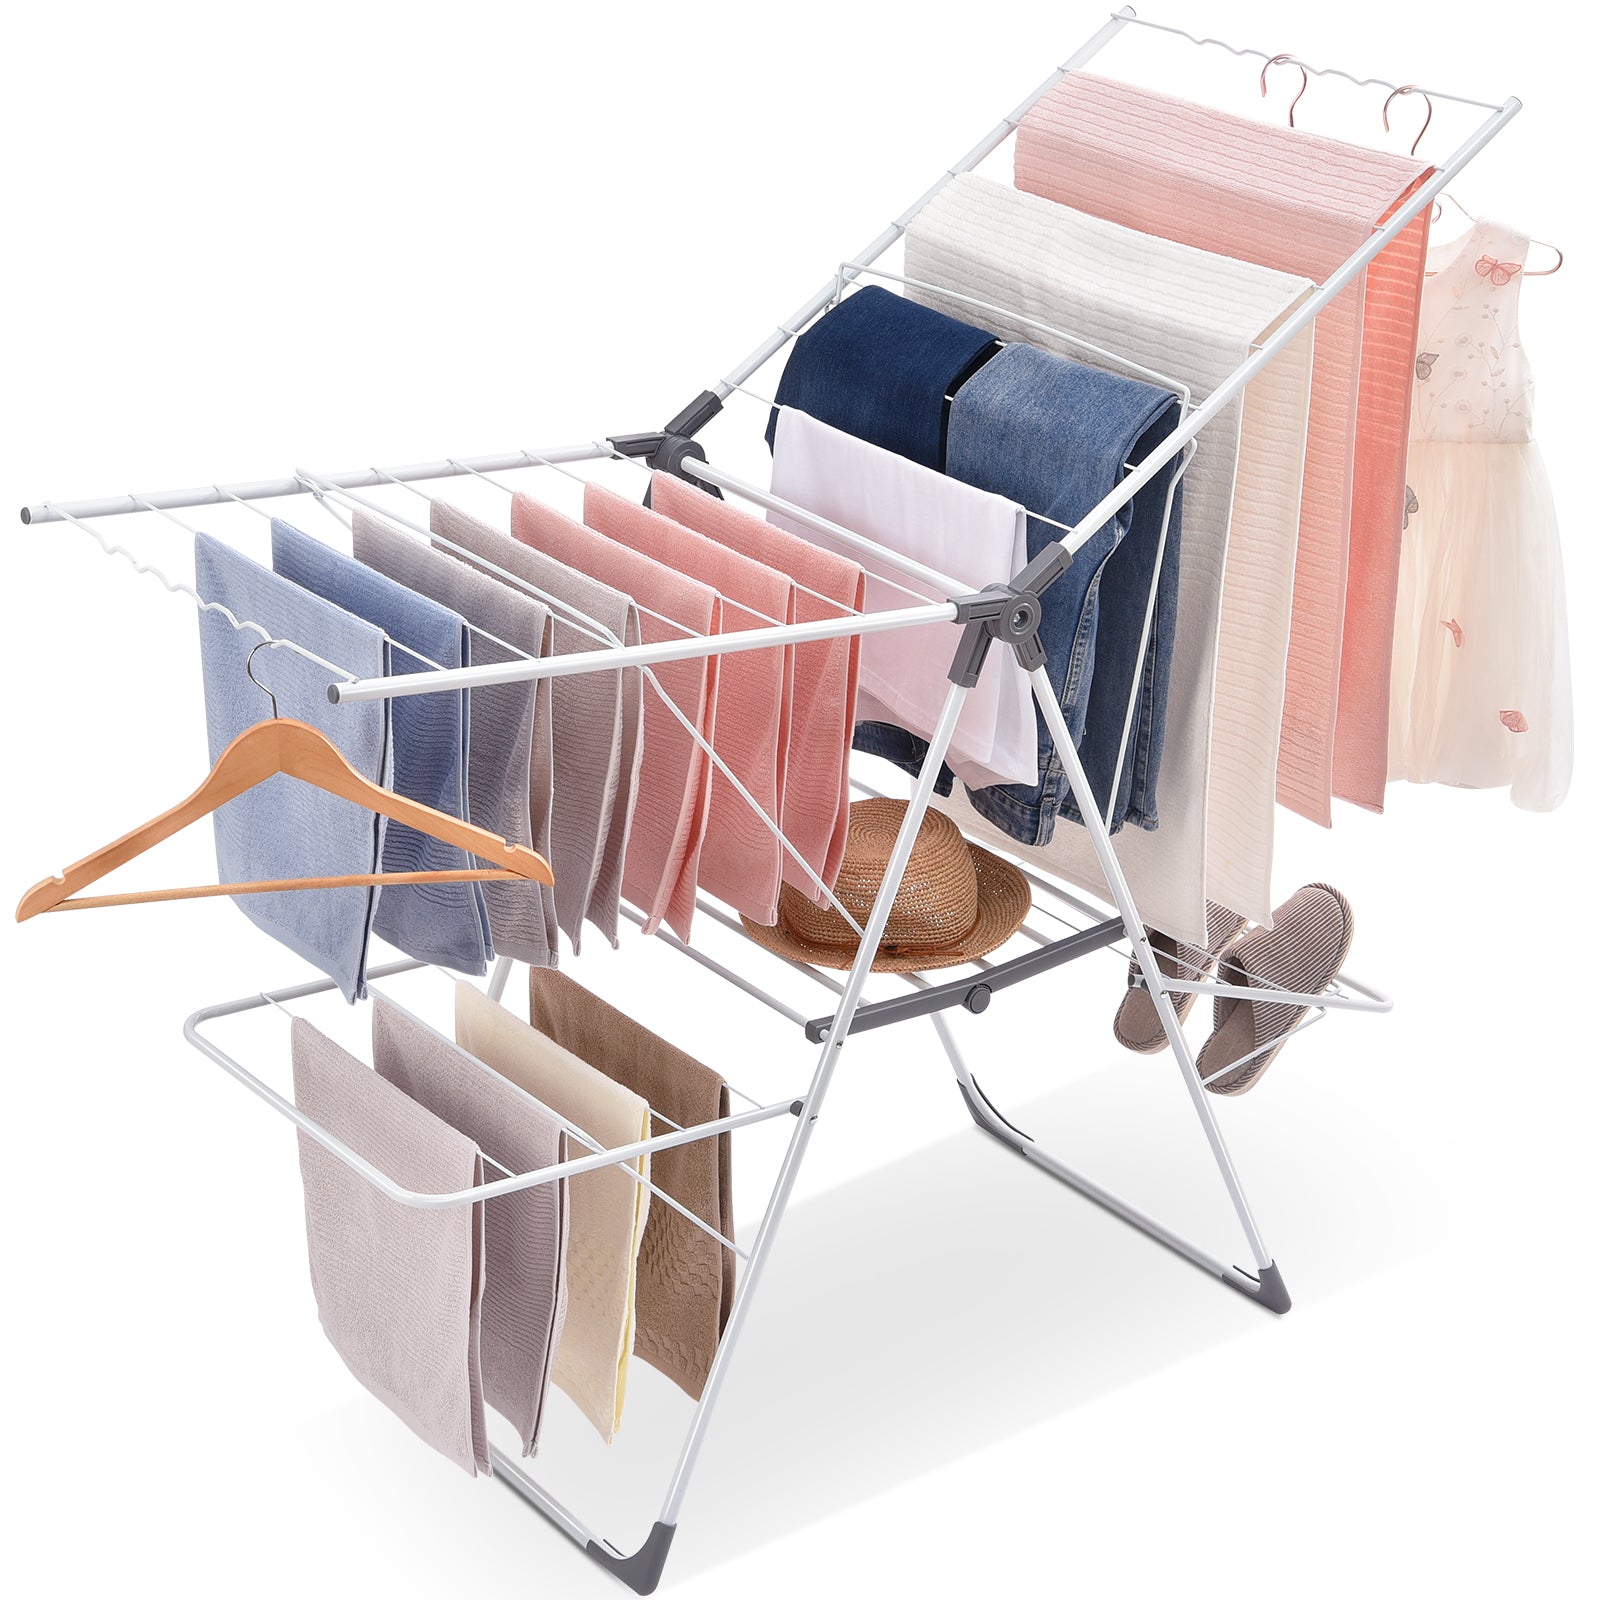 KINGRACK Clothes Drying Rack, 3-Tier Collapsible Laundry Rack Stand Ga –  Kingrack Home